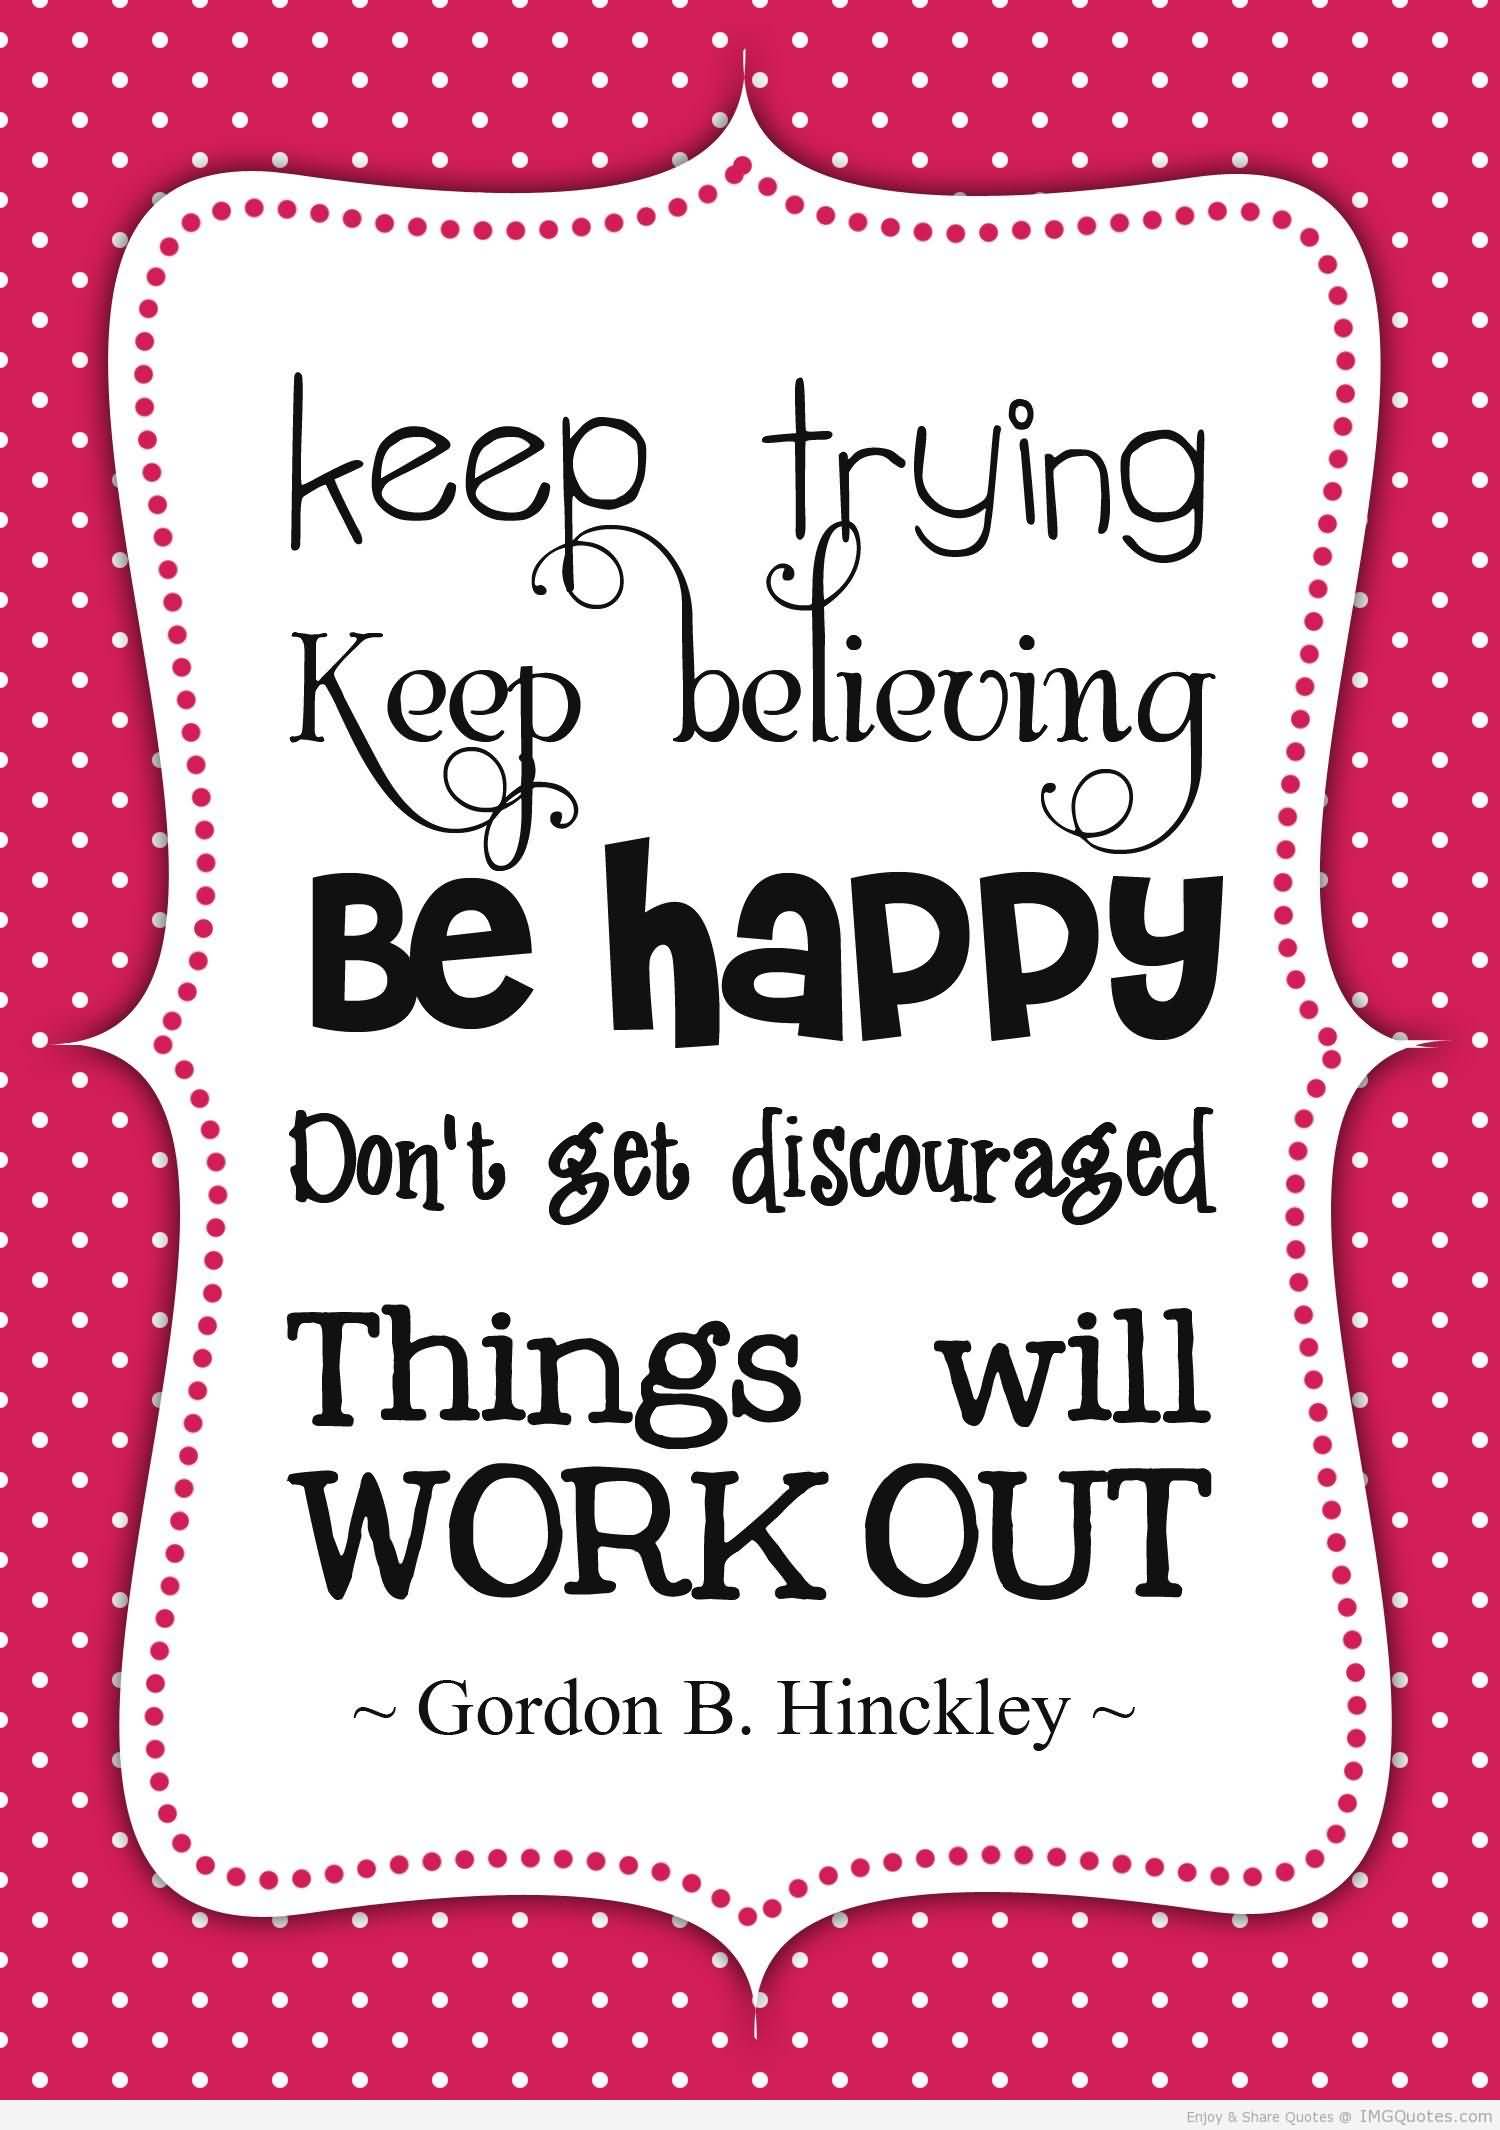 Things will work out. Keep trying. Be believing. Don't get discouraged. Things will work out. - Gordon B. Hinckley